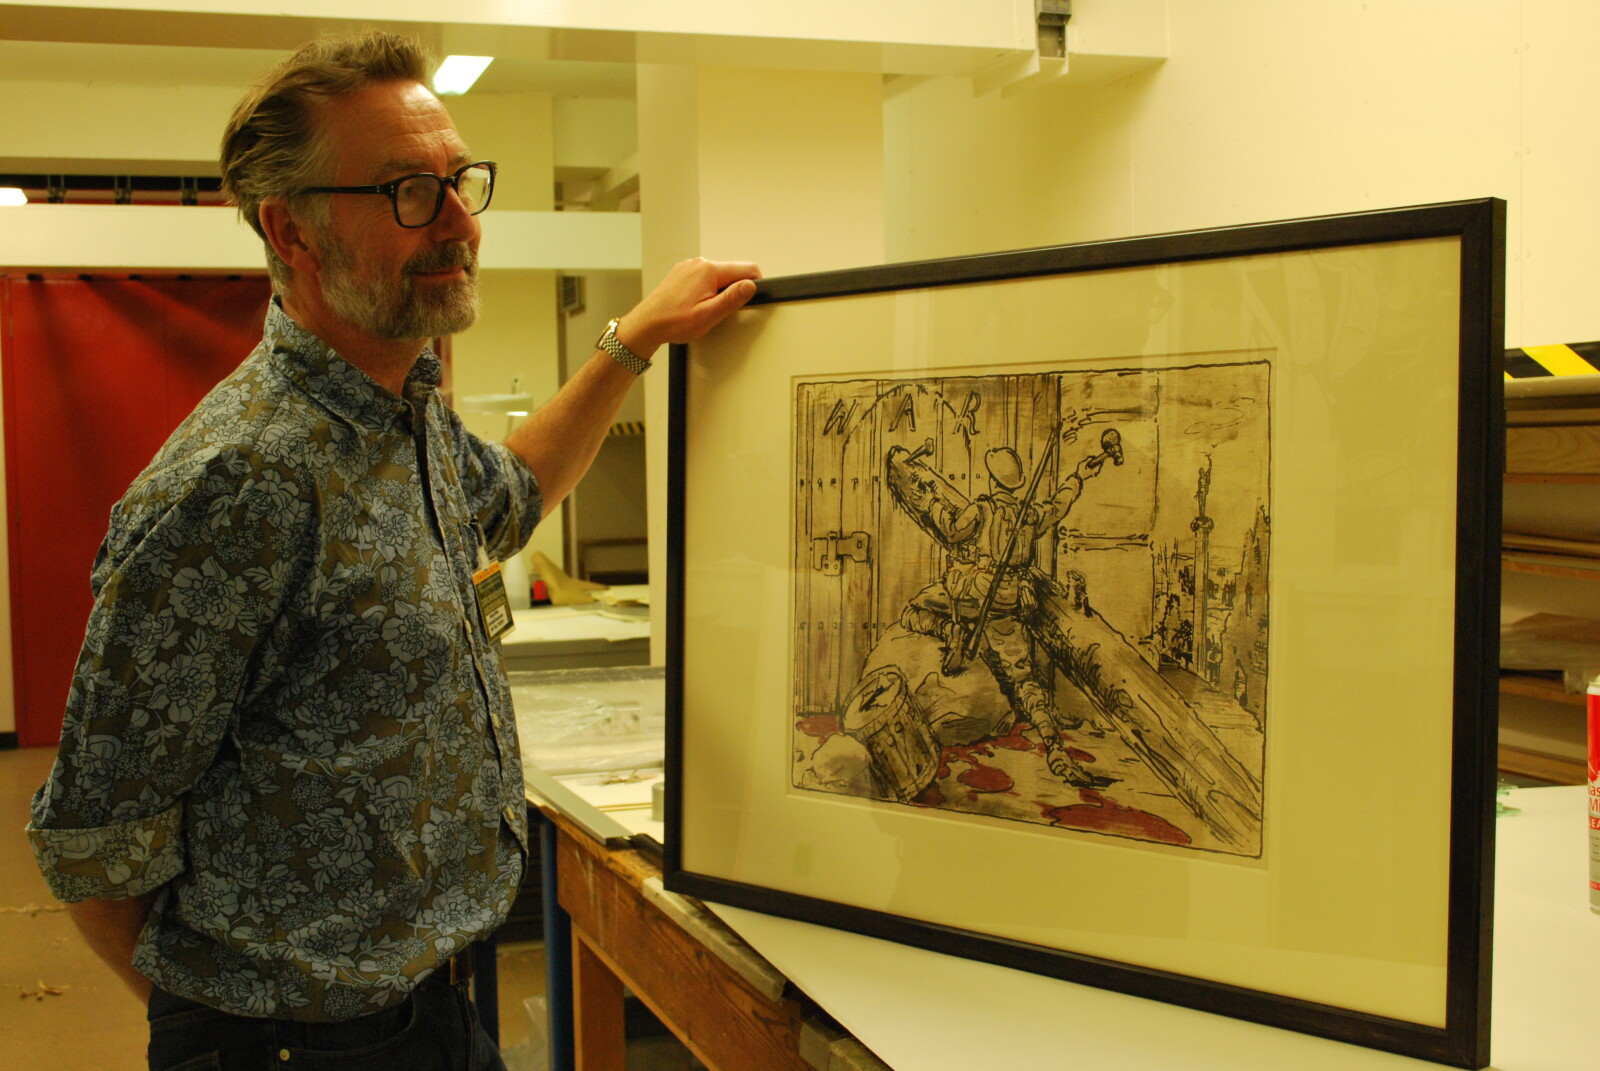 Richard showing us the finished framed lithograph print